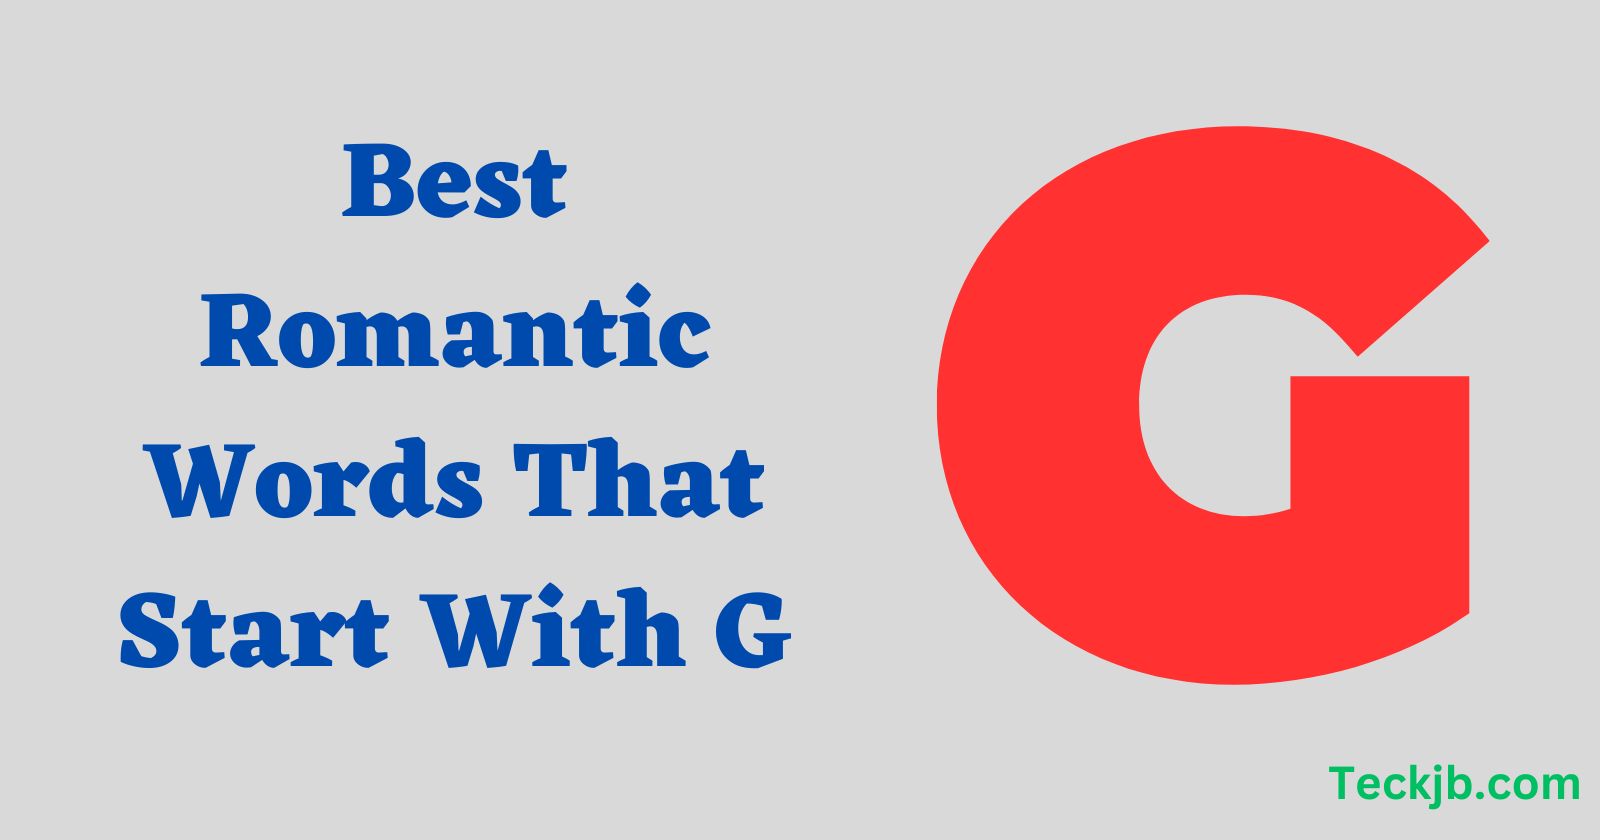 Romantic Words That Start With G